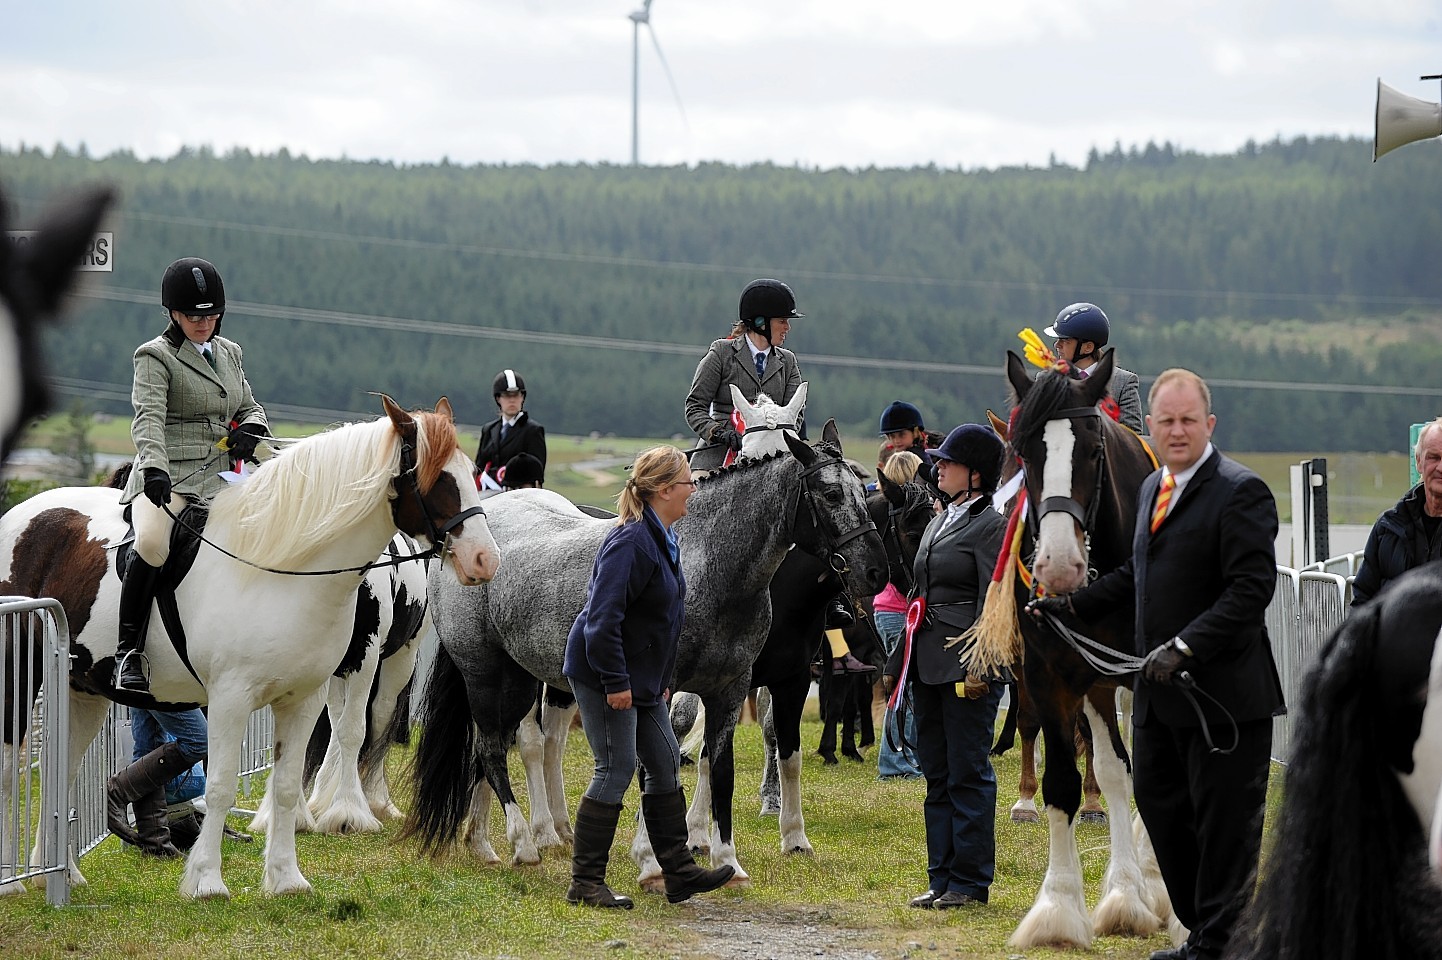 The Keith Show 2016 - Horses and riders gather before the big parade.